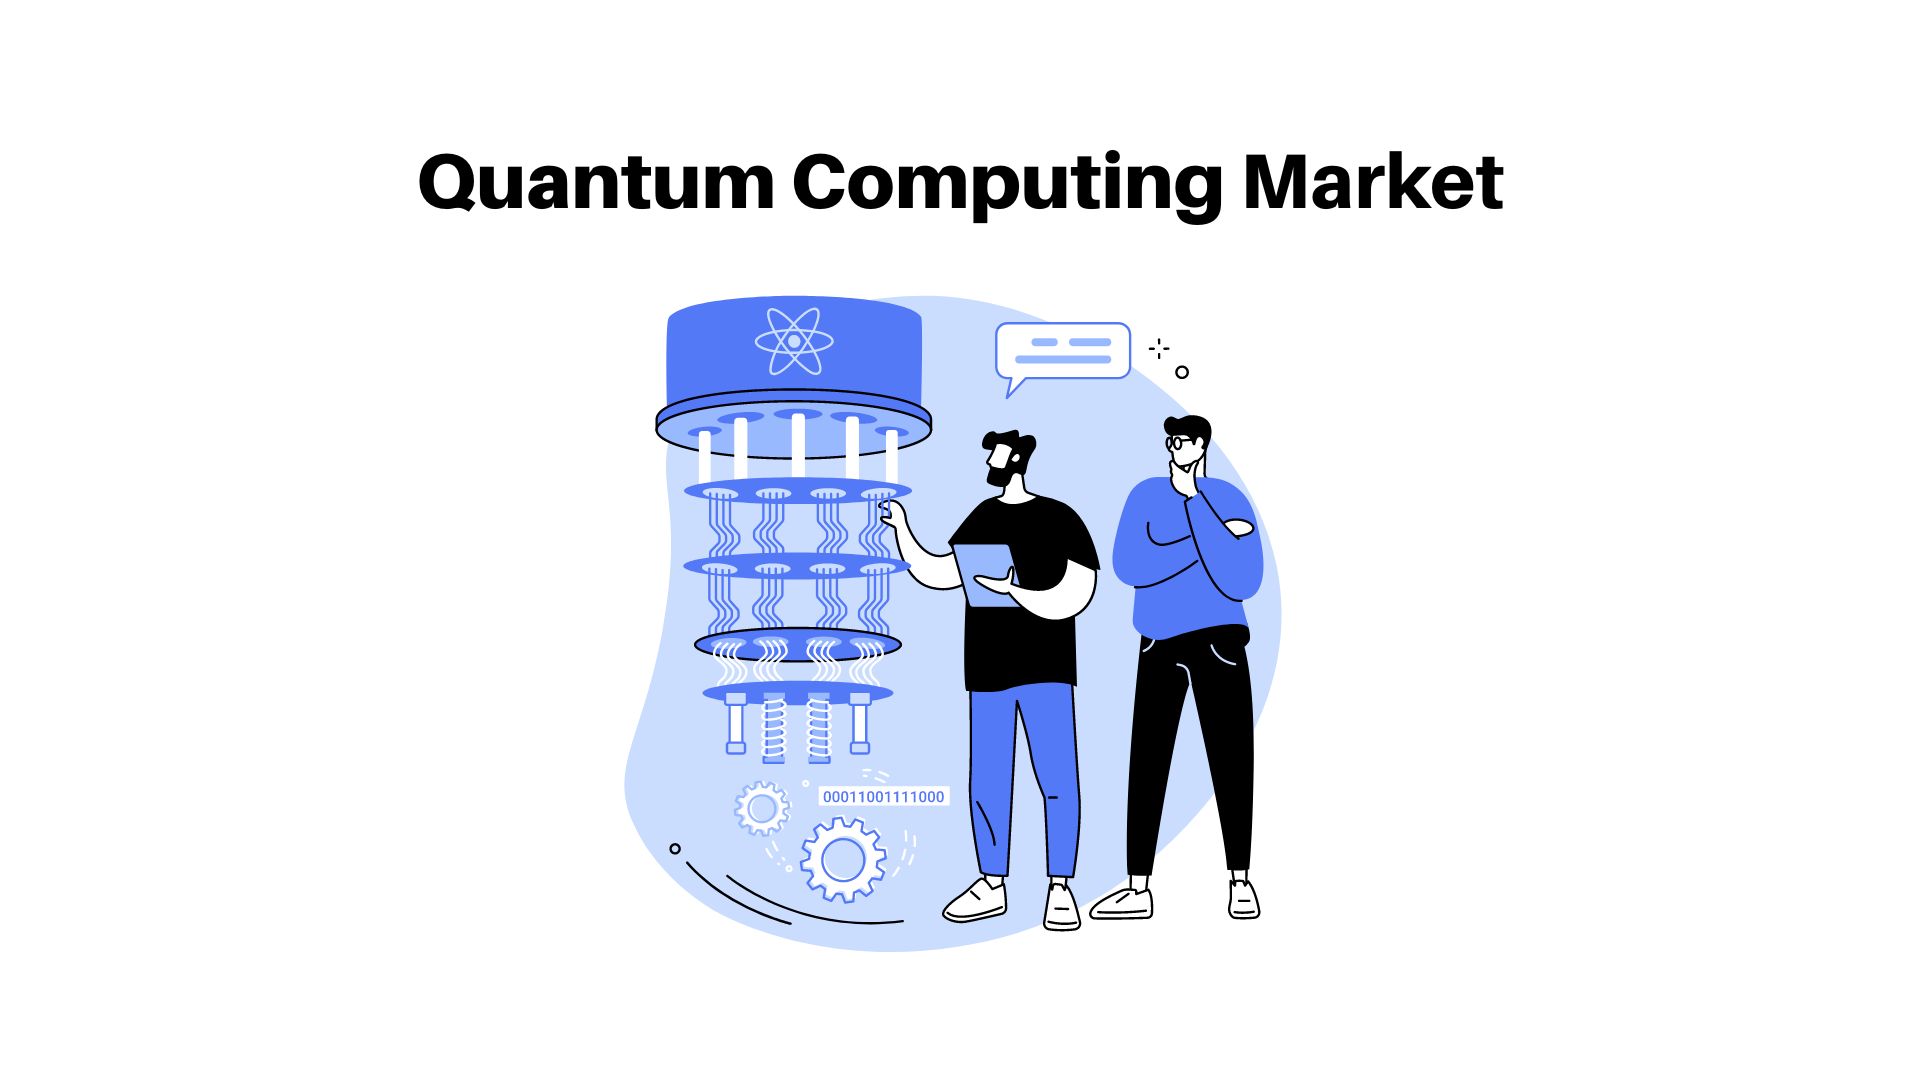 Quantum Computing Market was valued at nearly USD 234.06 billion by 2032